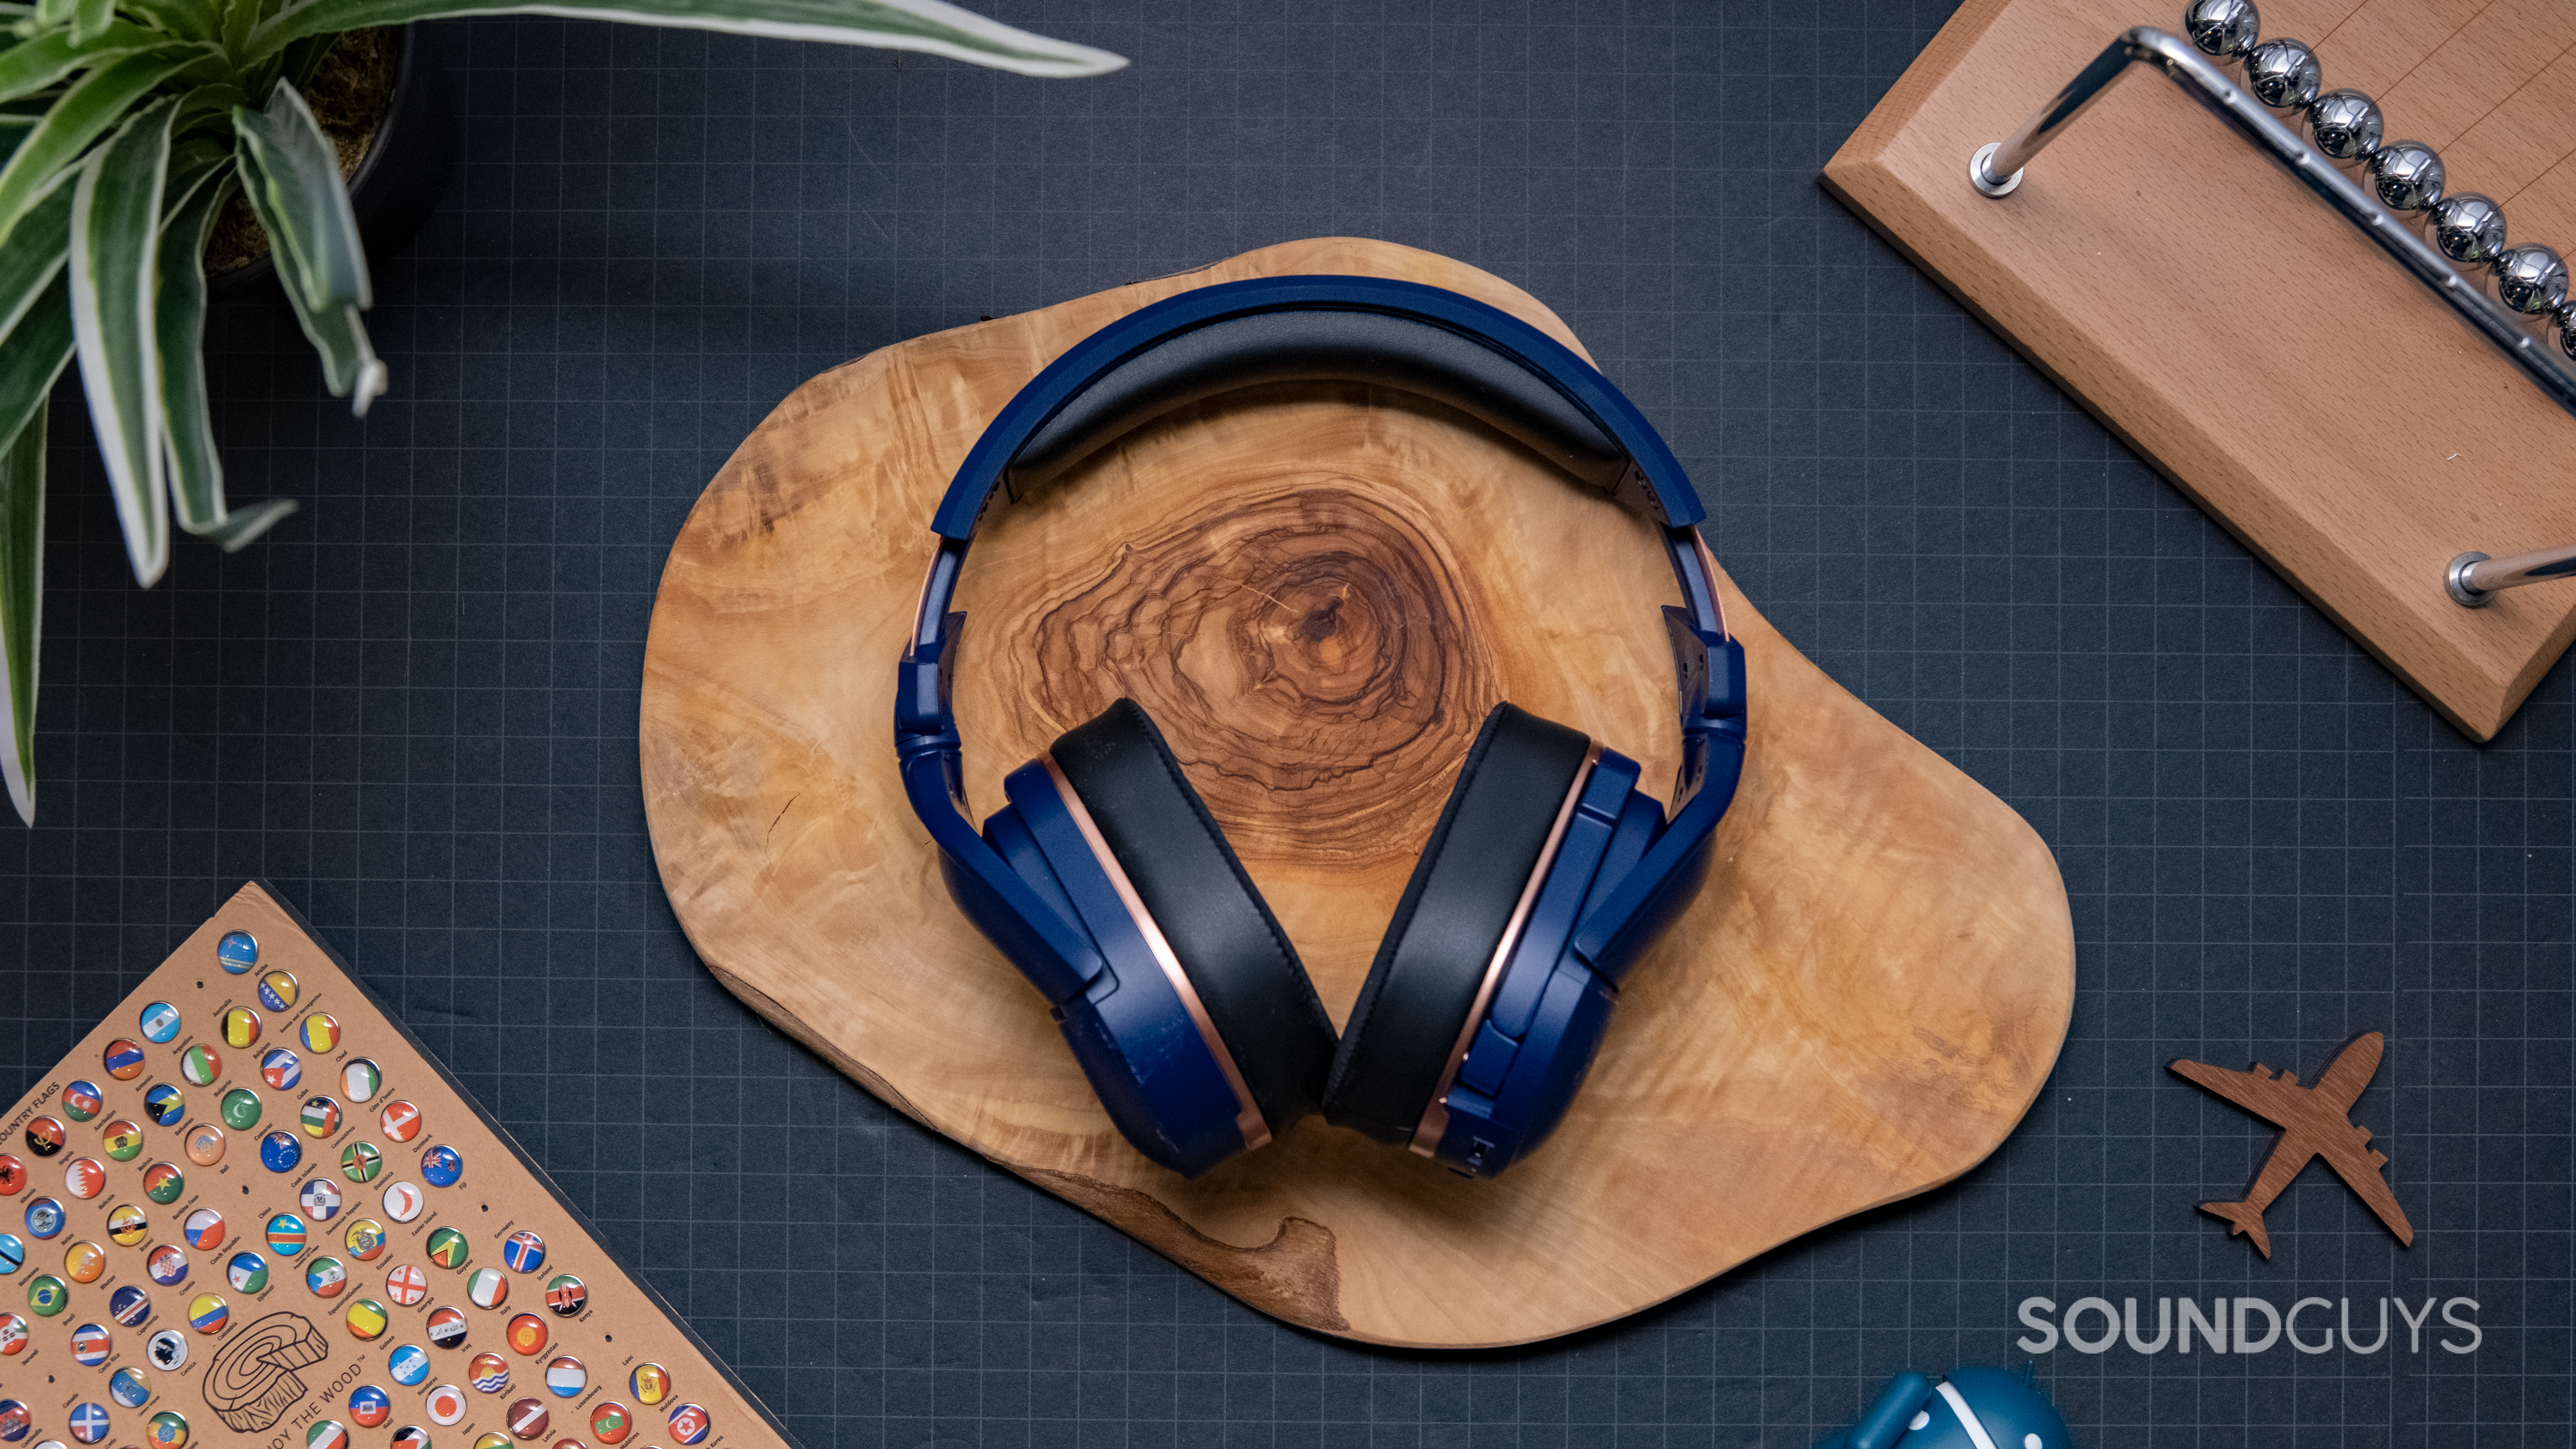 The Turtle Beach Stealth 700 Gen 2 MAX placed atop a woodgrain surface.